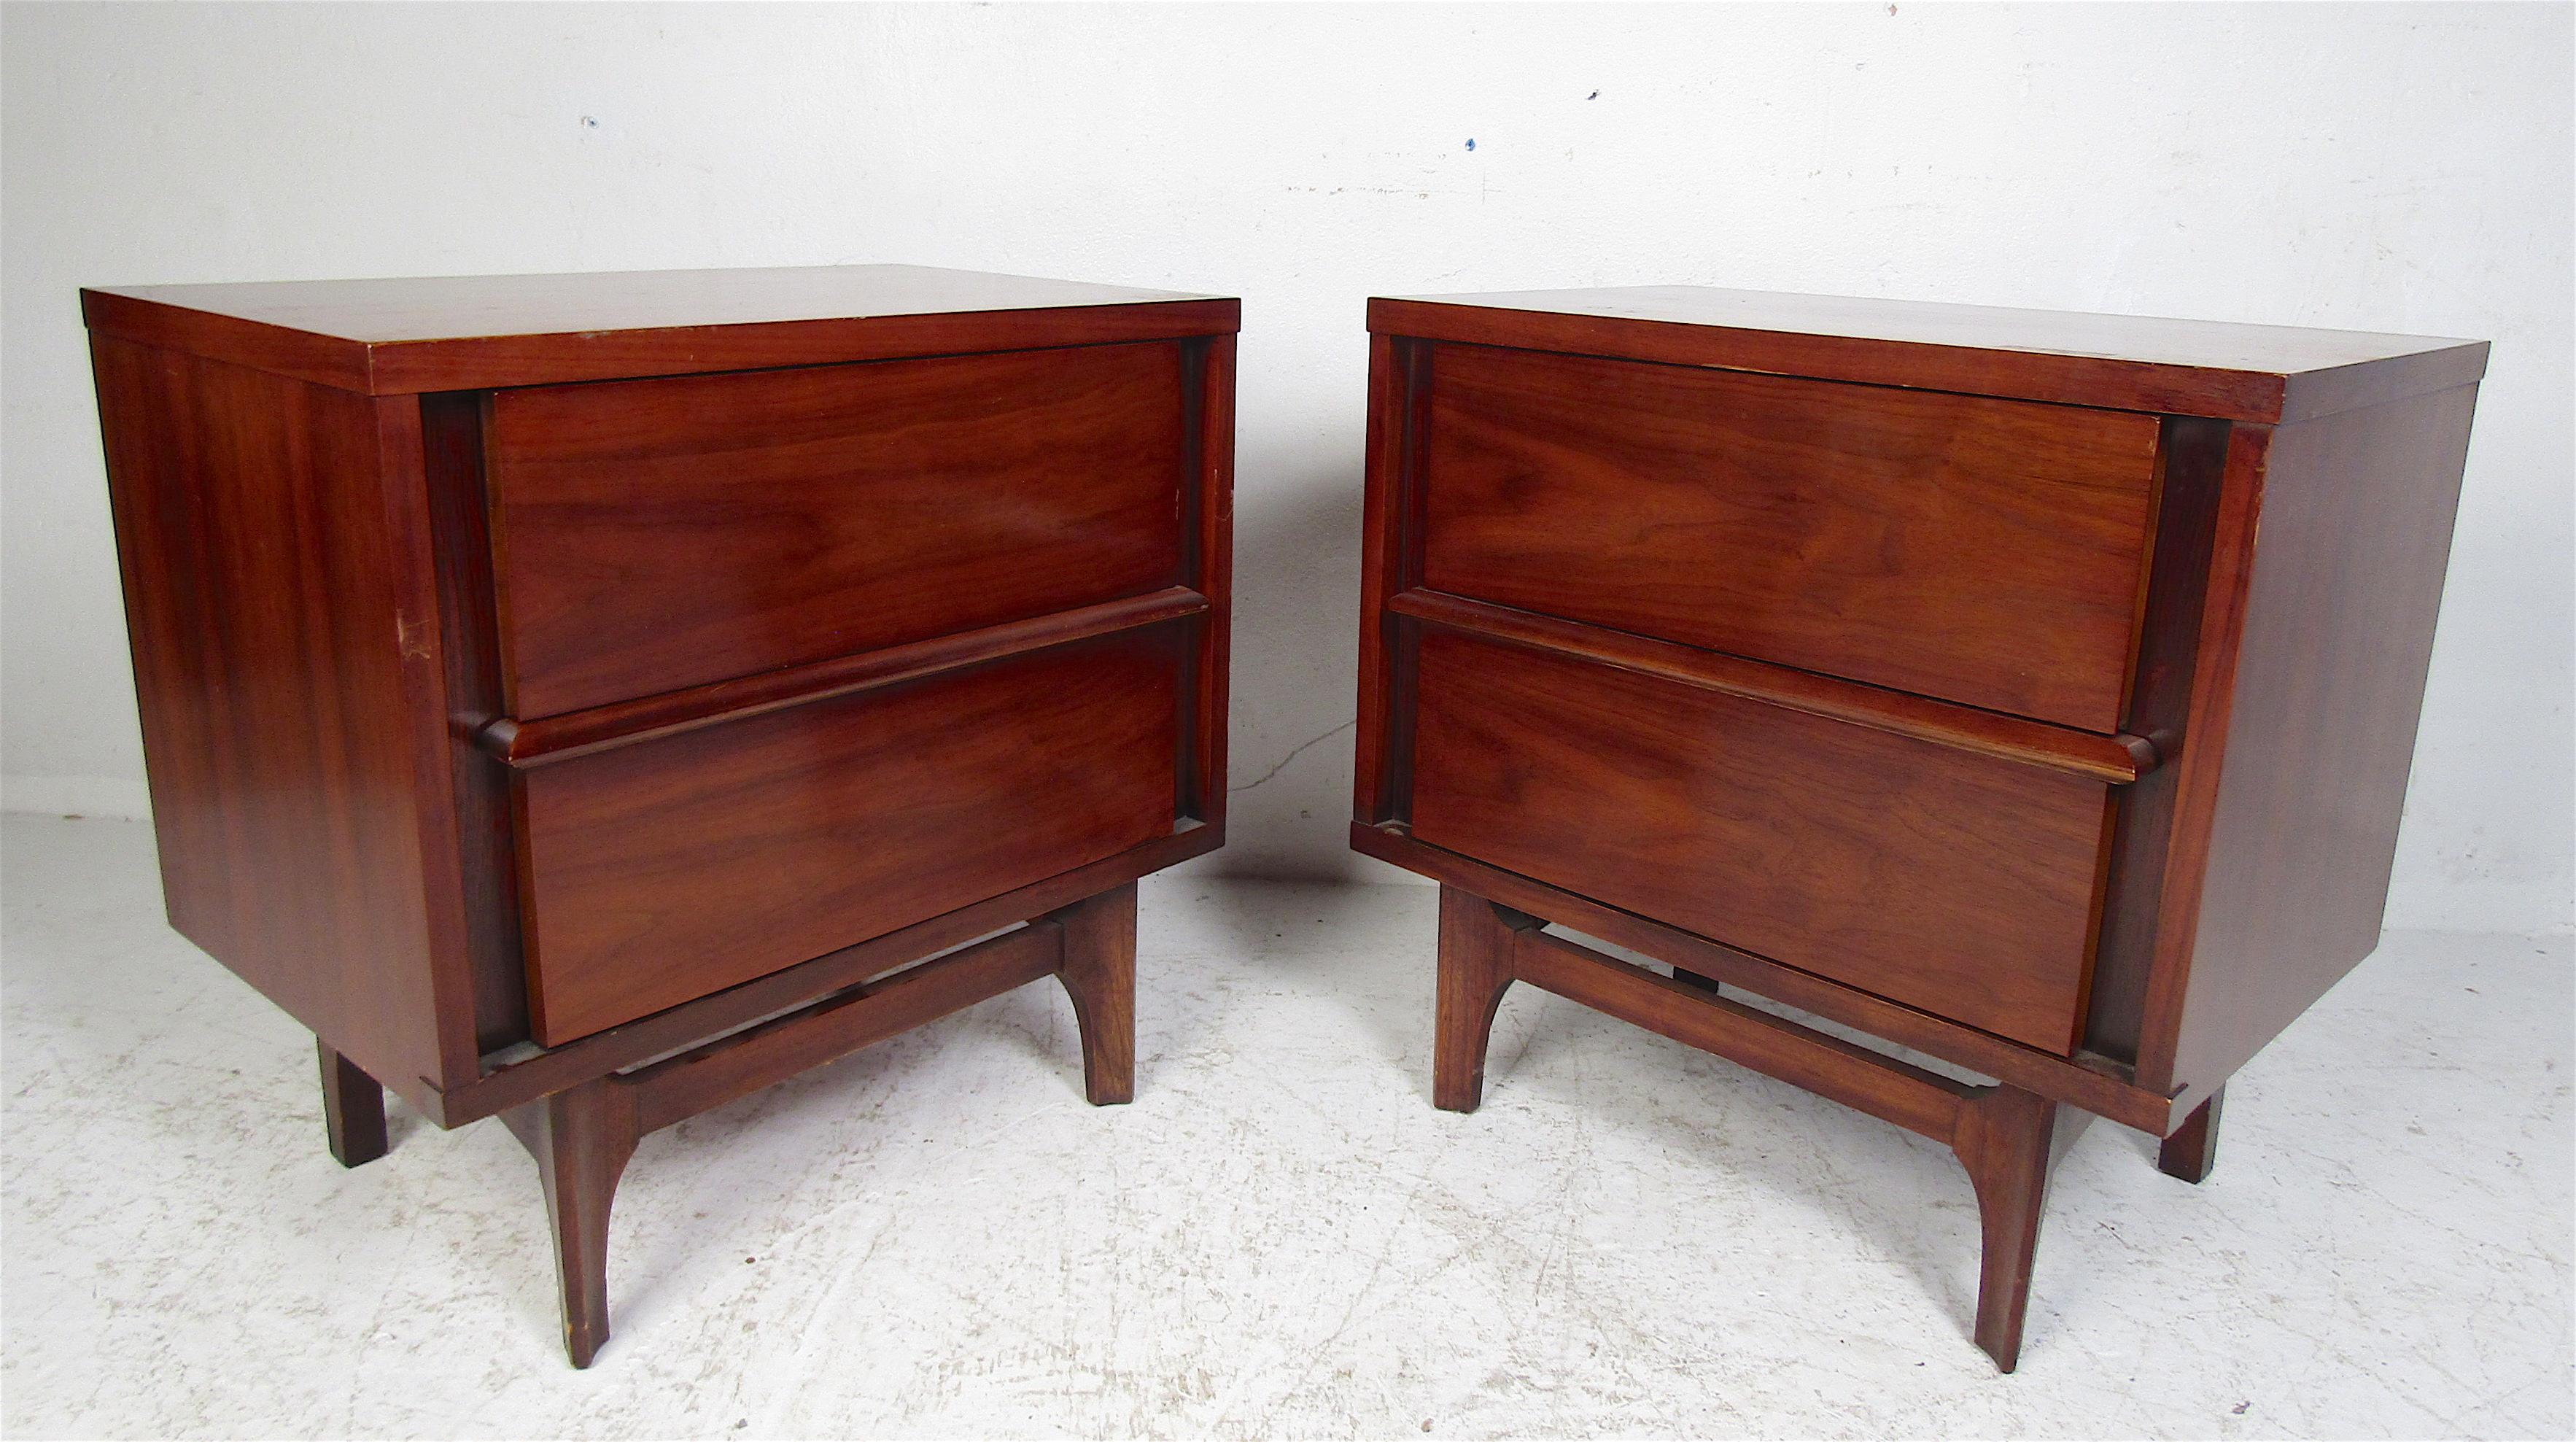 Beautiful pair of Mid-Century Modern Kent Coffey Predicta nightstands. Well-made case pieces with a vintage walnut finish, sculpted legs, and two hefty drawers ensuring ample storage space. This sleek pair of side tables make the perfect addition to